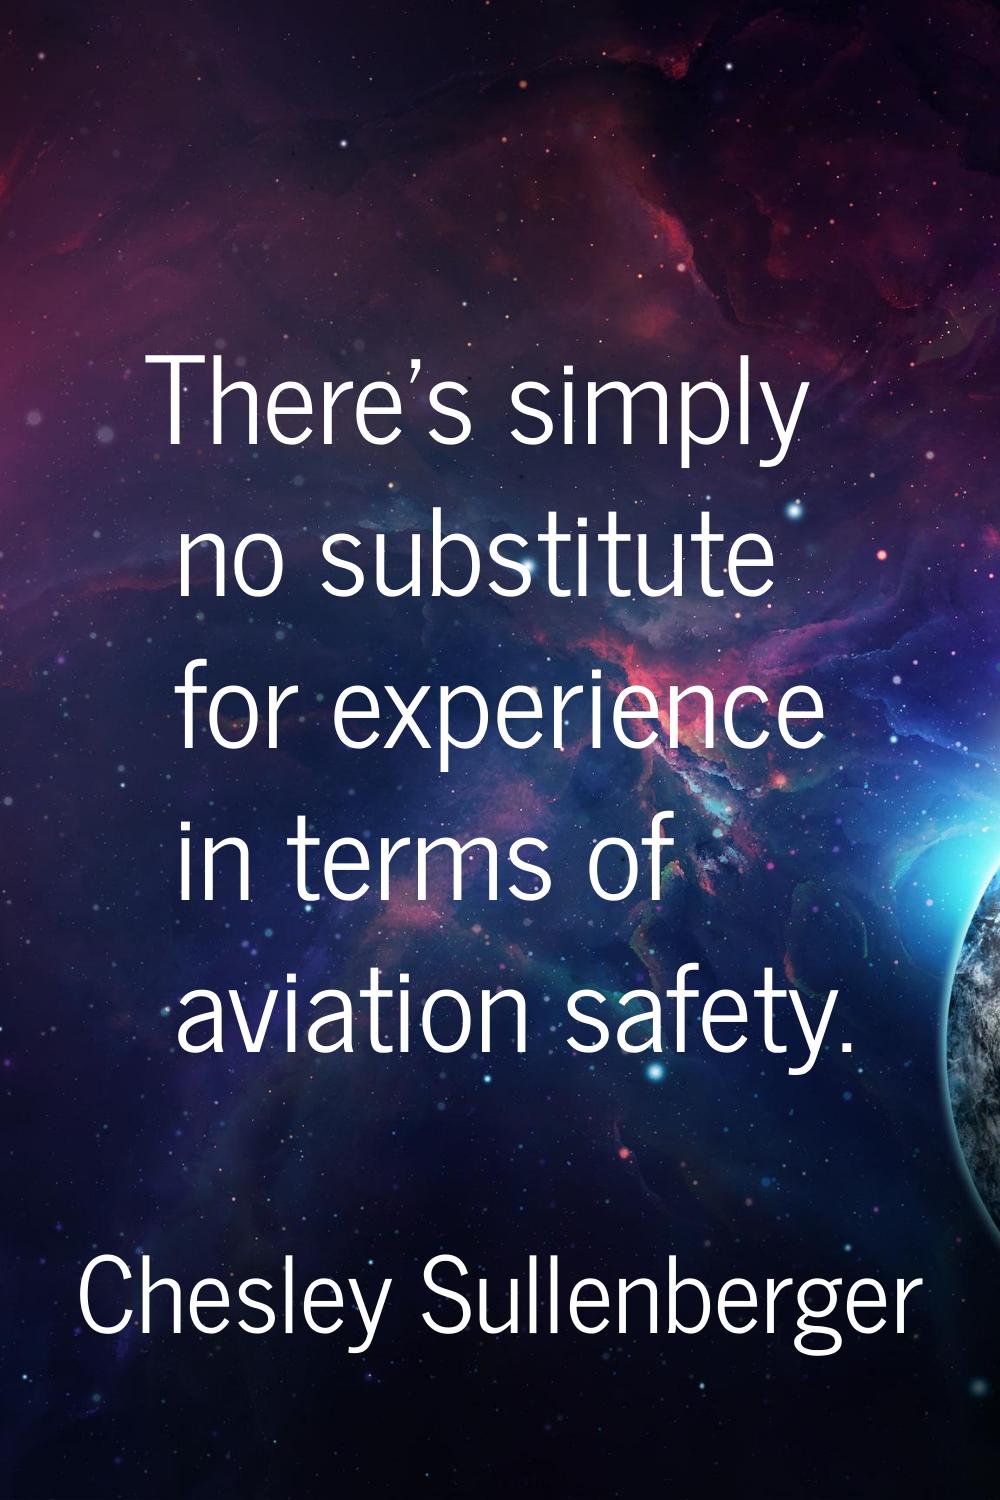 There's simply no substitute for experience in terms of aviation safety.